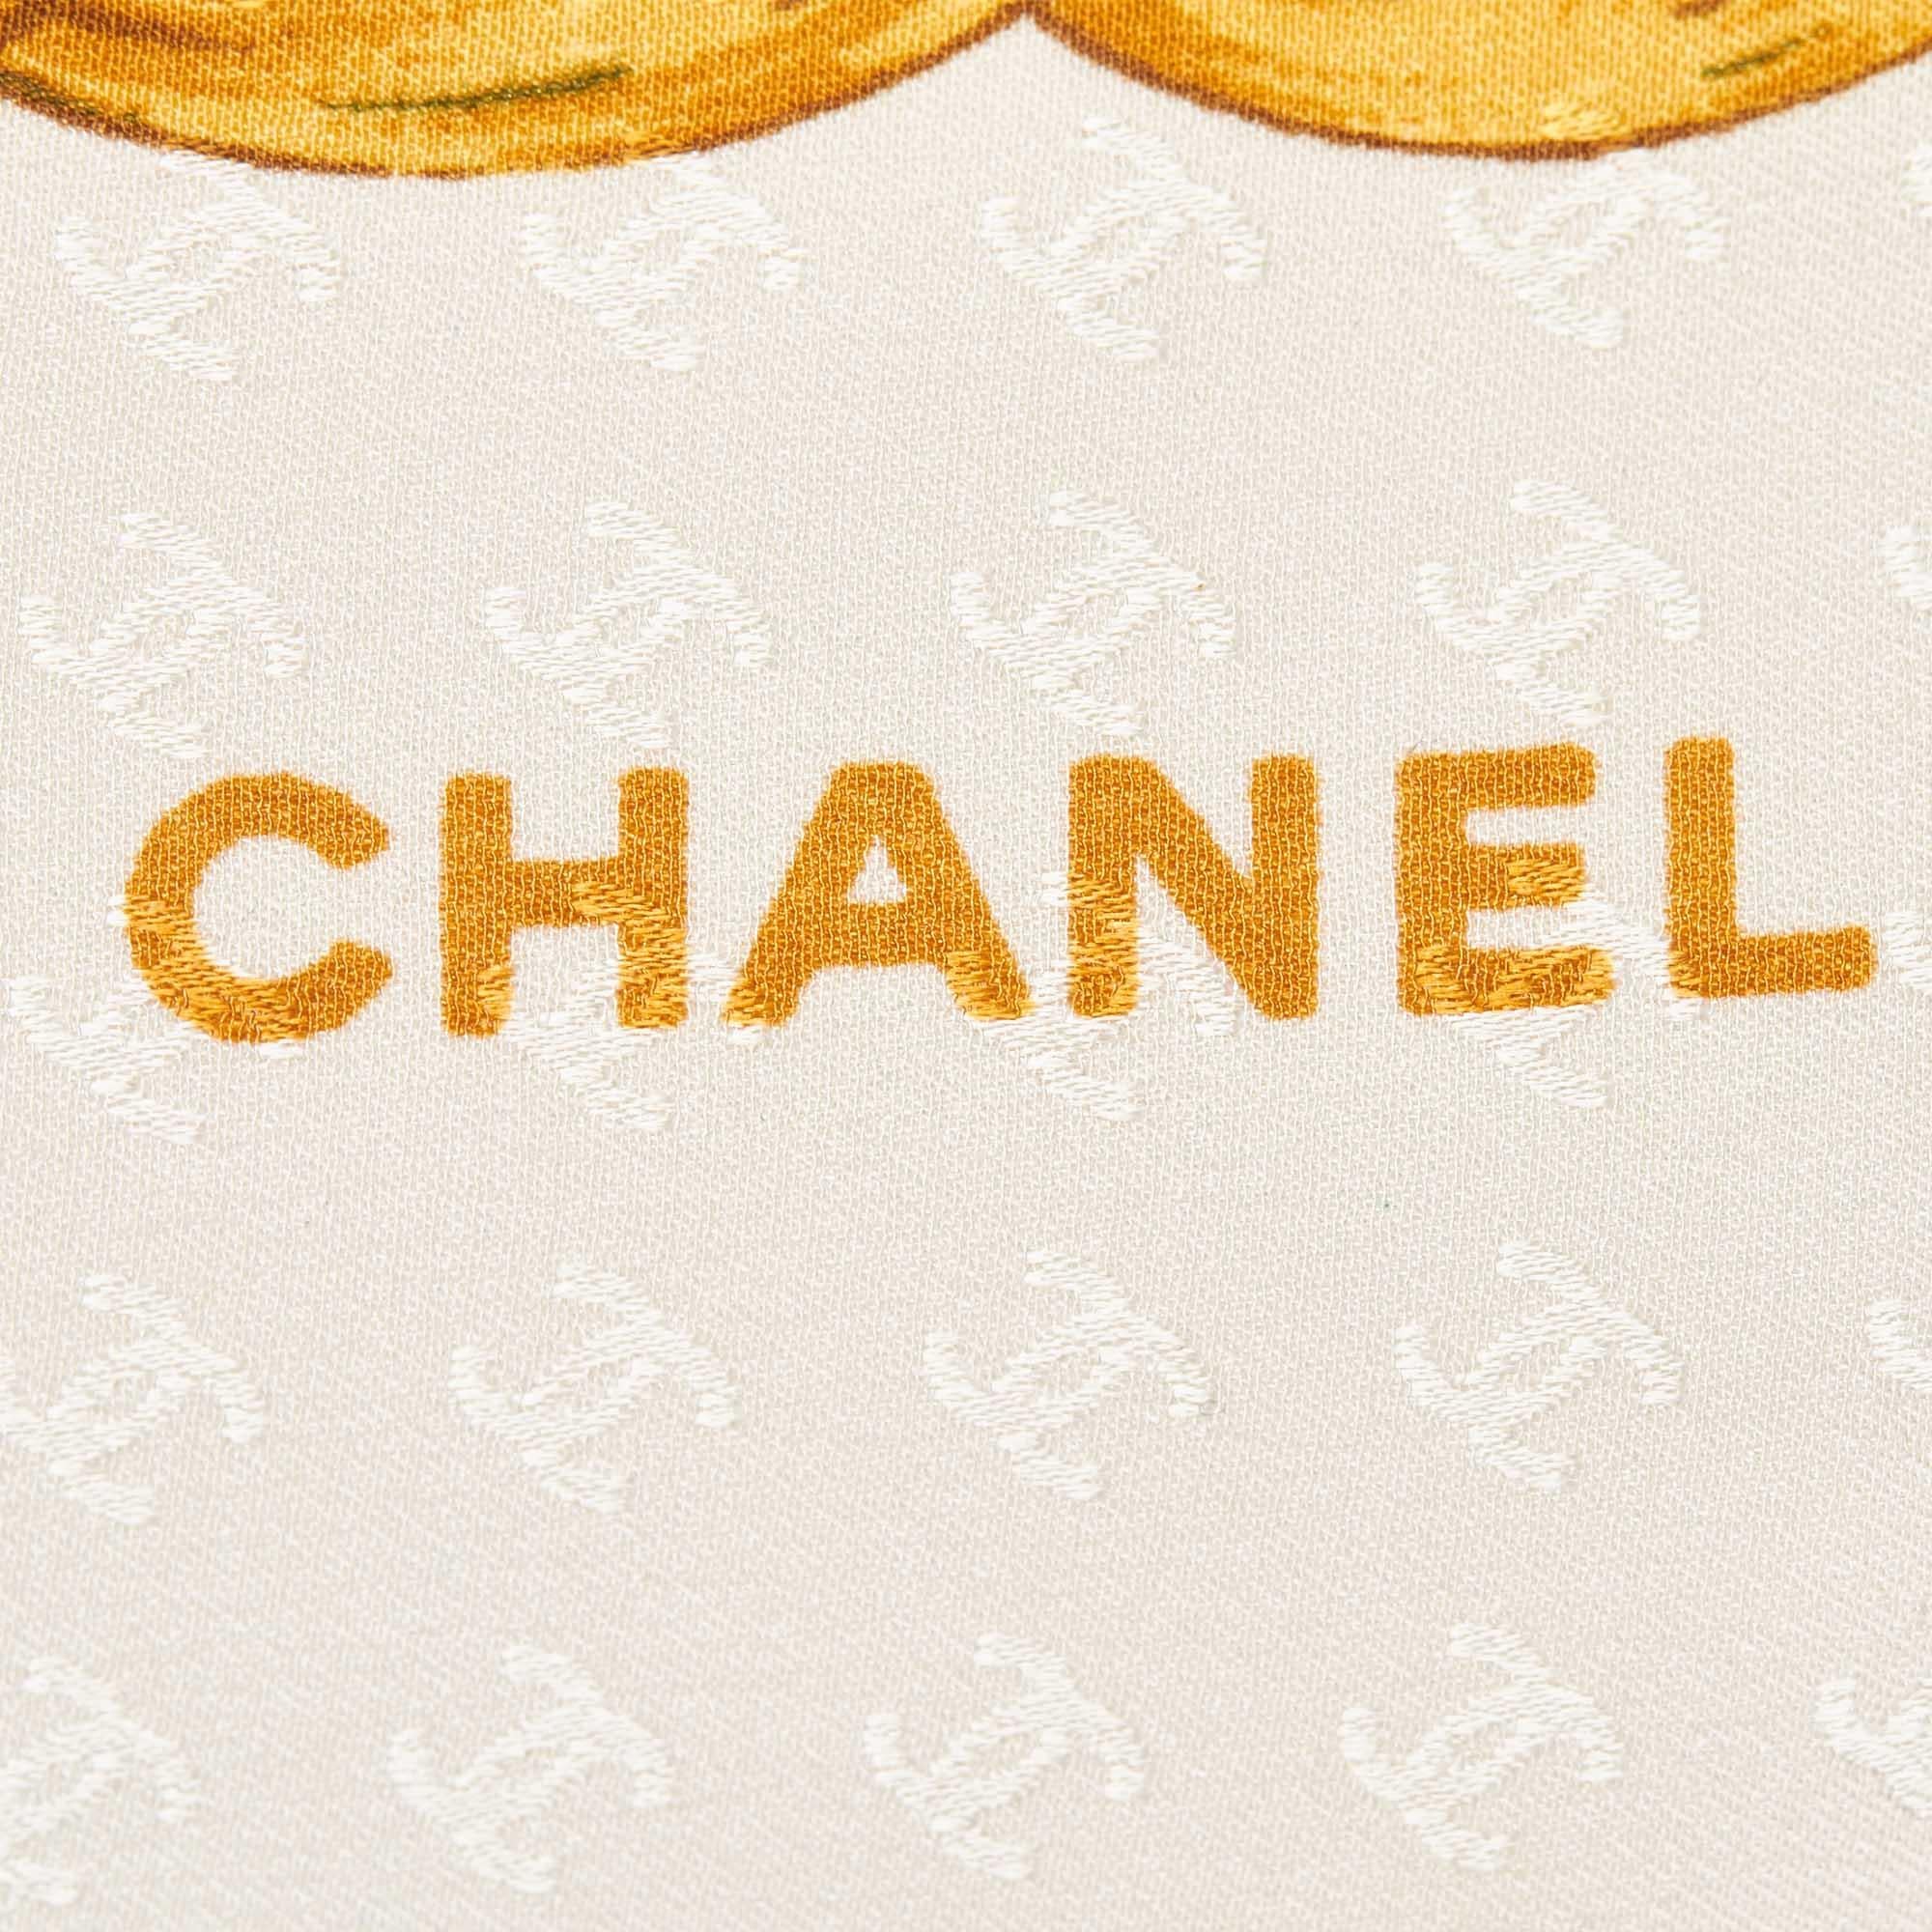 Chanel Printed Silk Scarf

-This scarf features a print on 100% silk.
-in great condition

84cm x 84.5cm